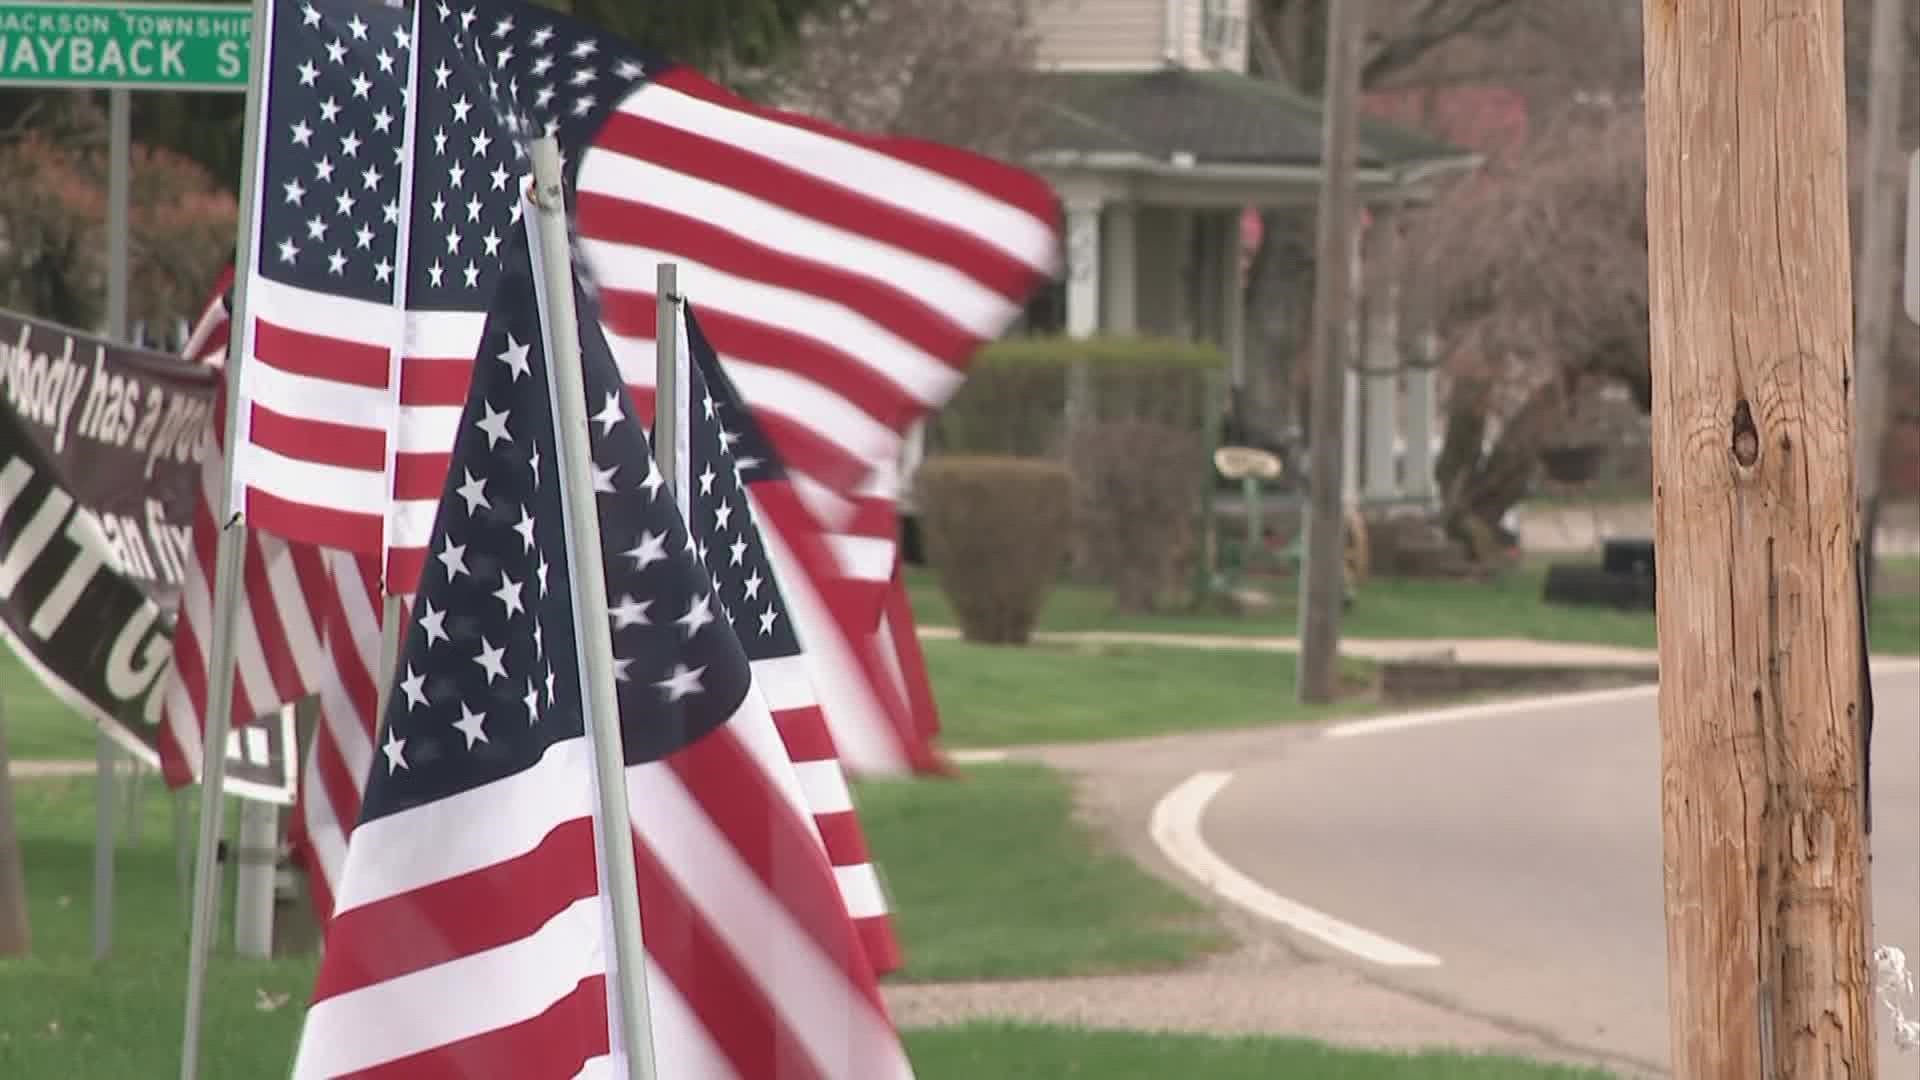 A small Ohio community pays their final respects to a fallen marine from Cambridge.